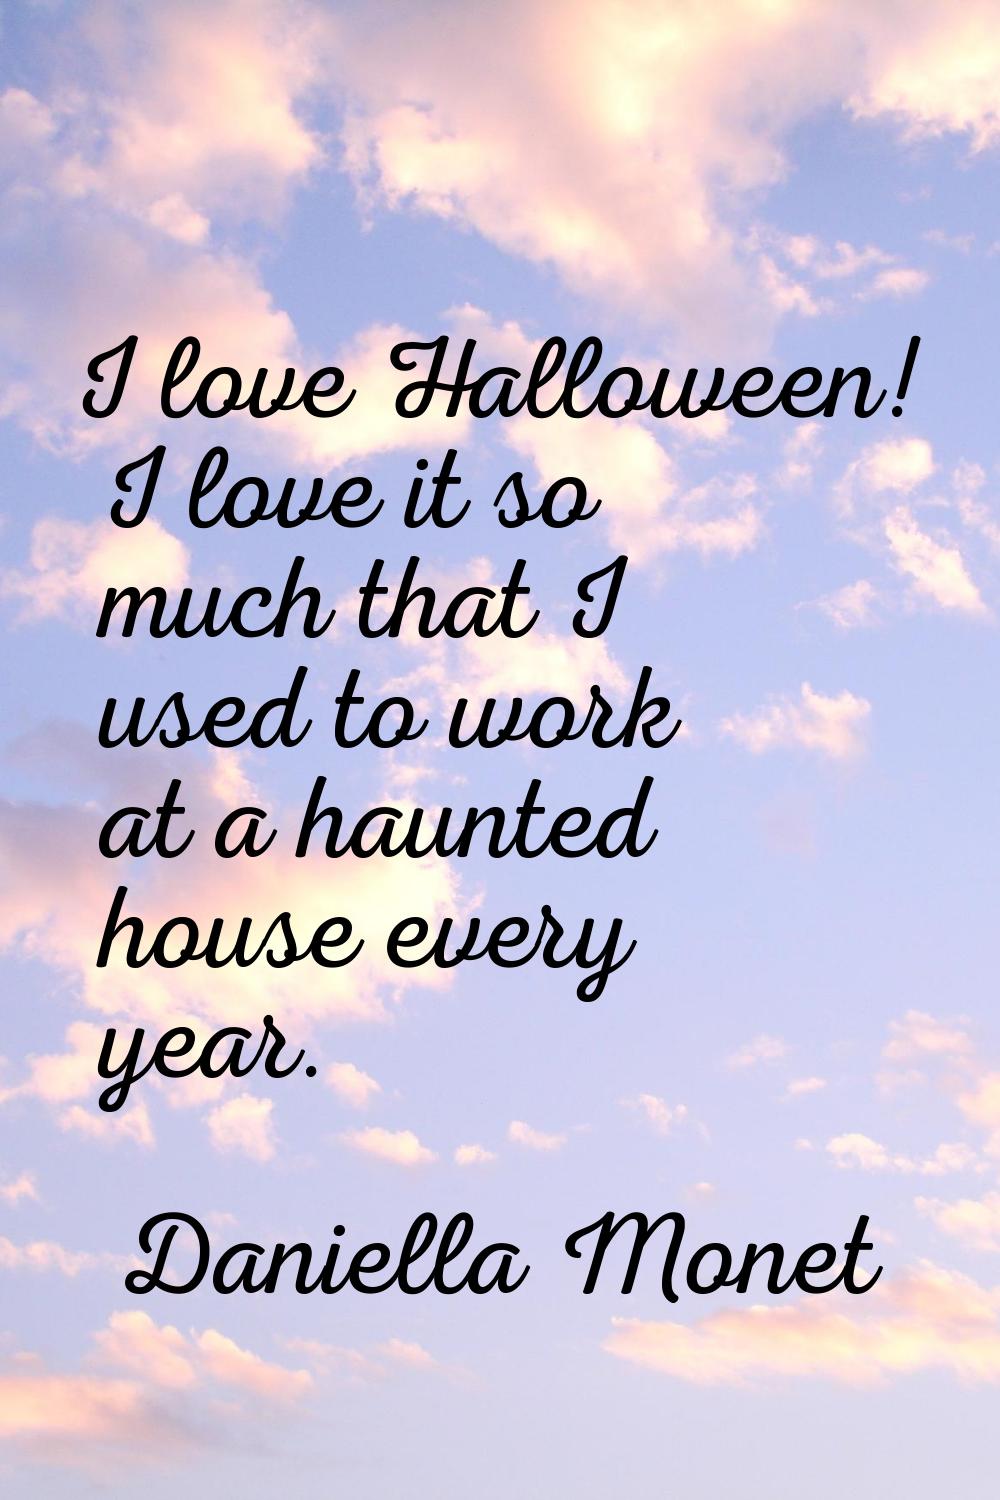 I love Halloween! I love it so much that I used to work at a haunted house every year.